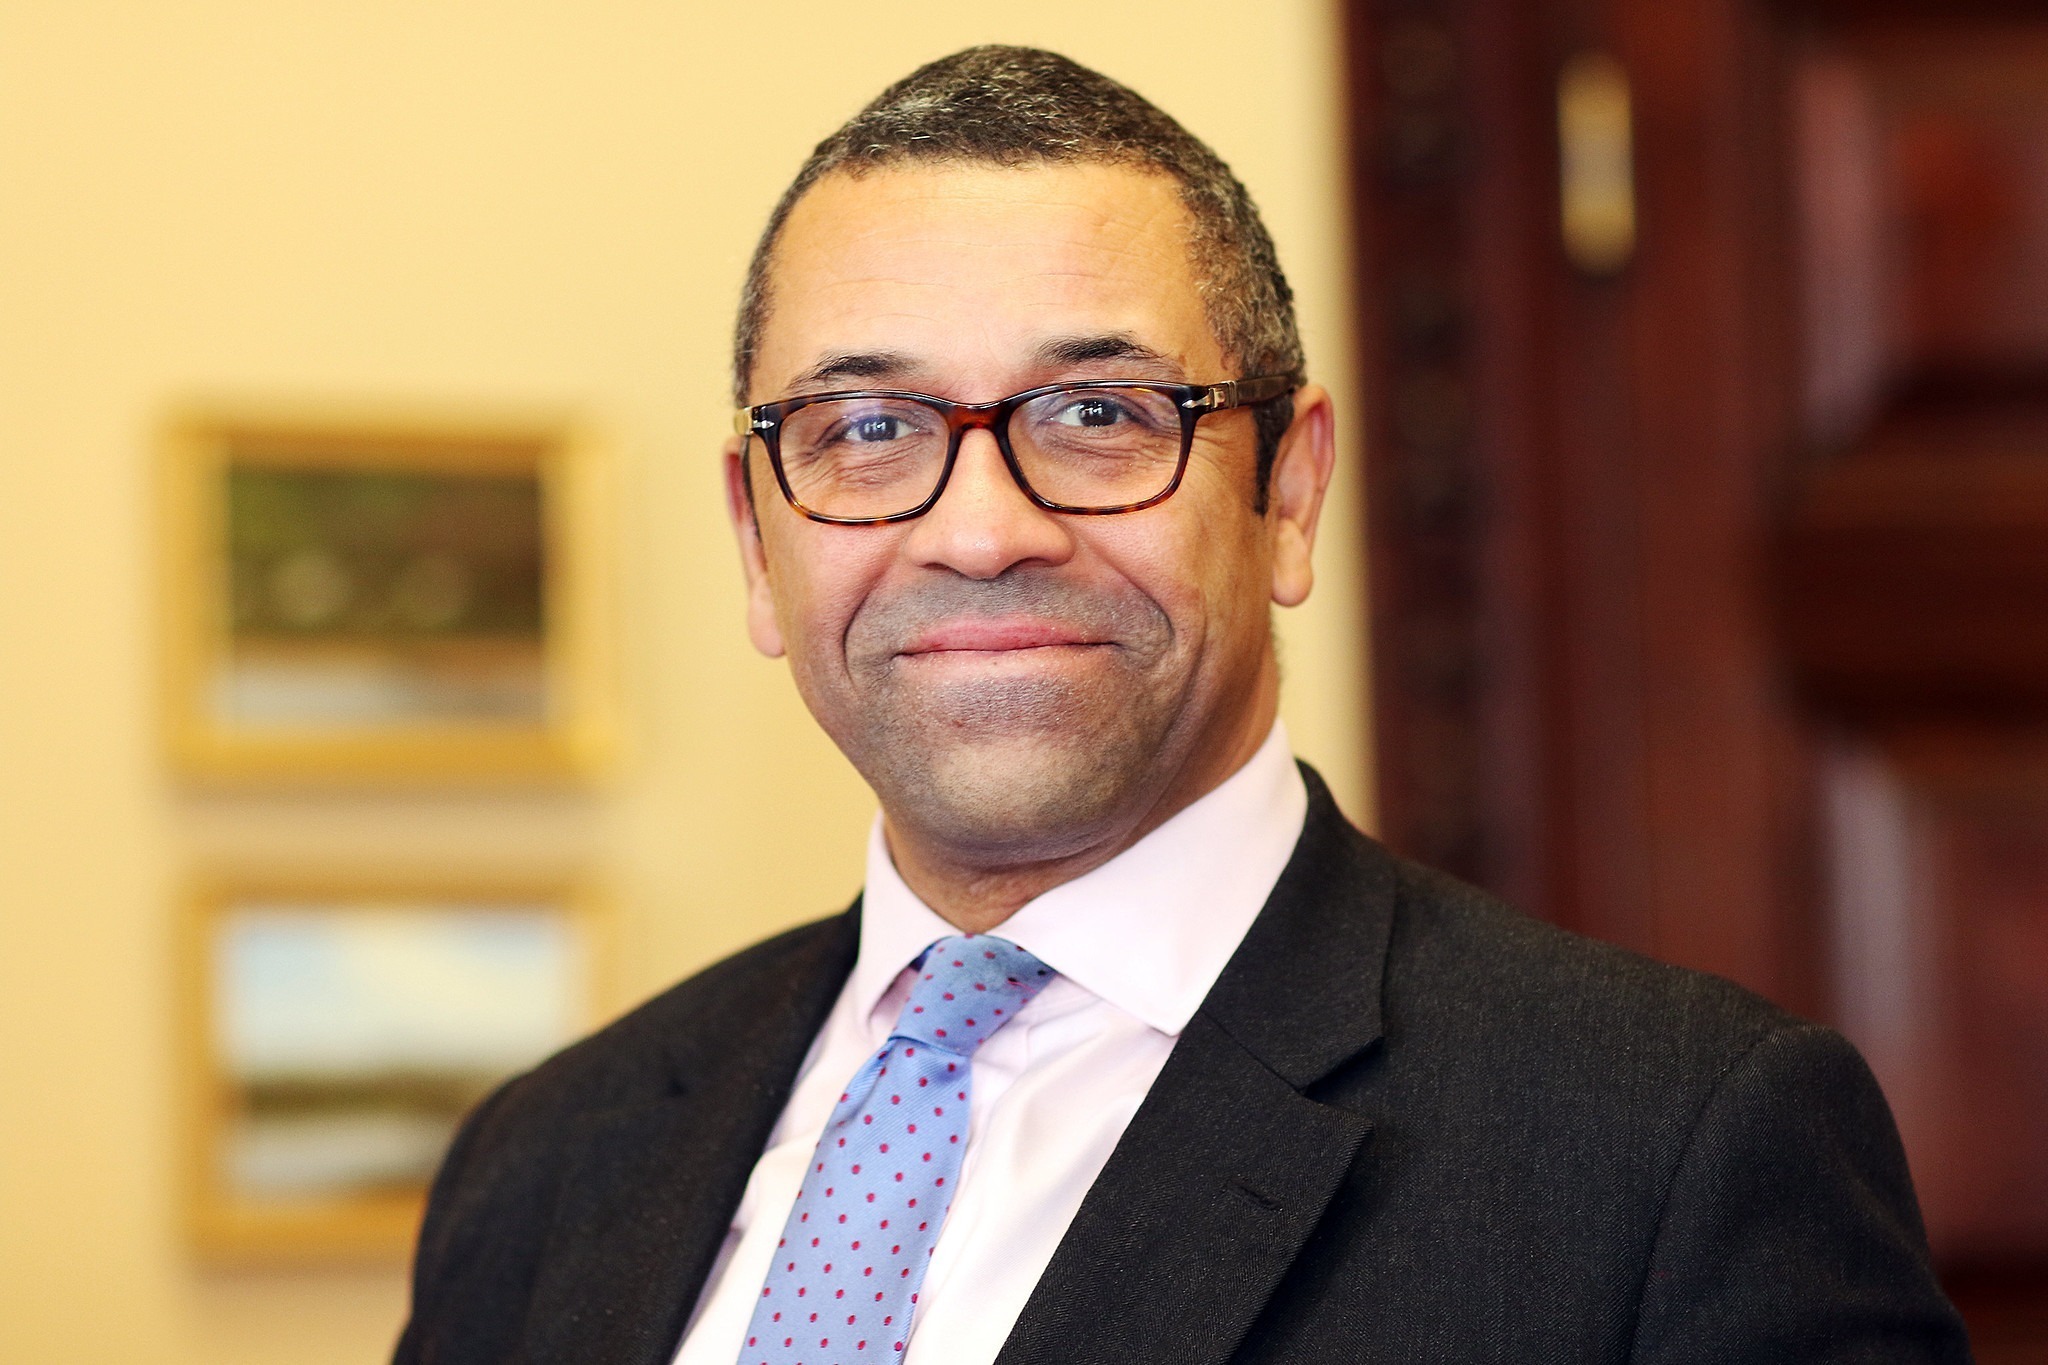 Foreign minister James Cleverly accused of breaking ministerial Code over arms to Israel